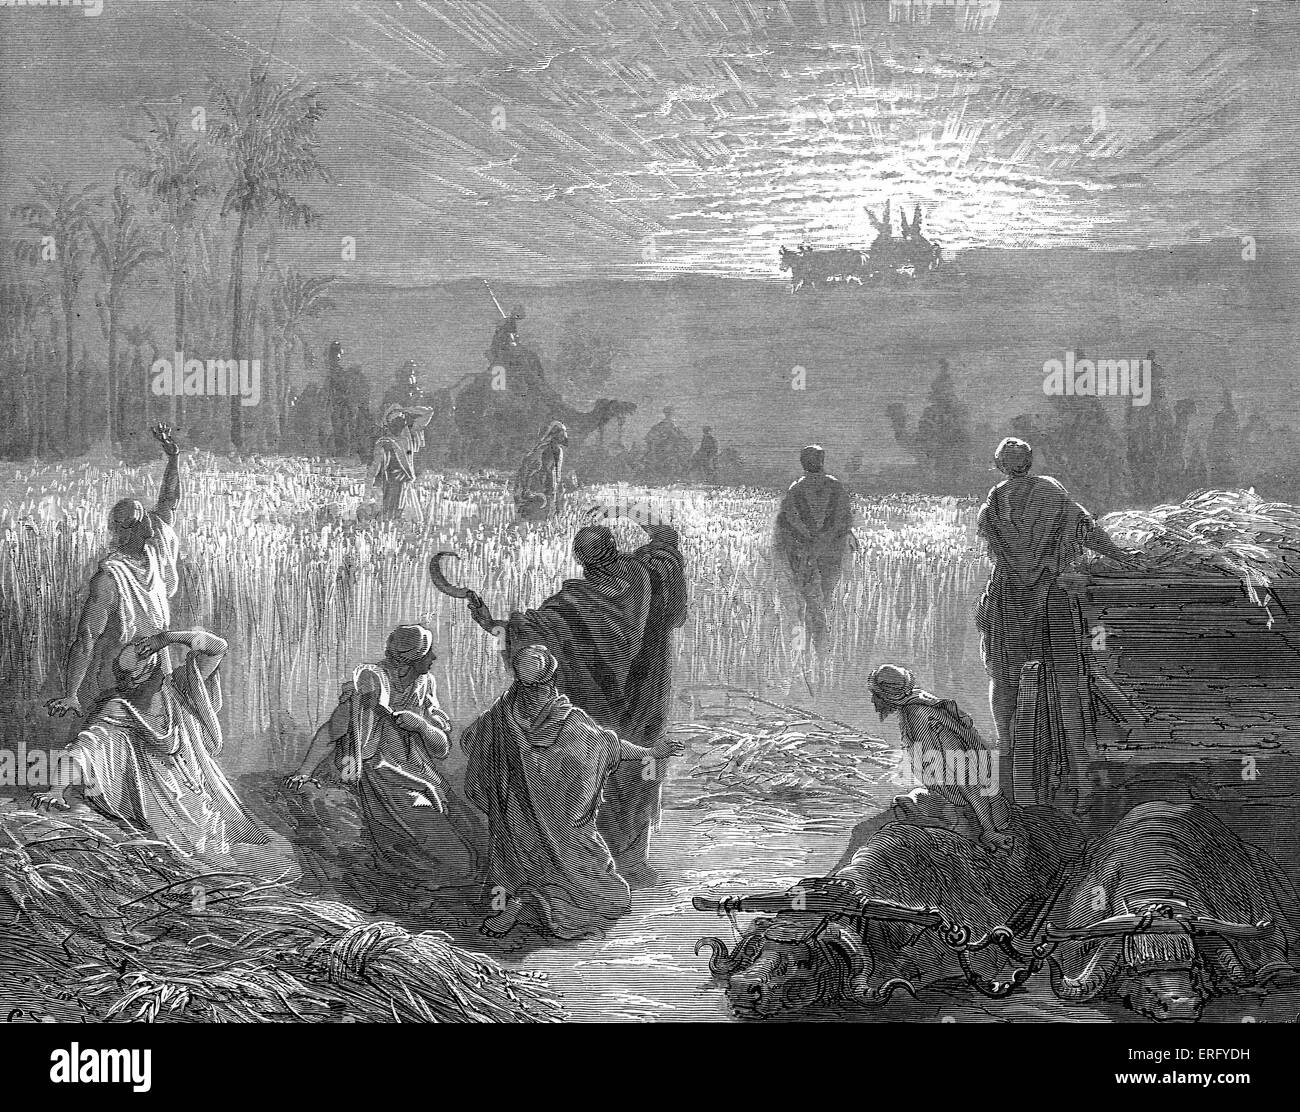 The return of the Ark of the Covenant to Beth Shemesh, engraving by Gustave Doré. The Israelites, harvesting the wheat in the Stock Photo